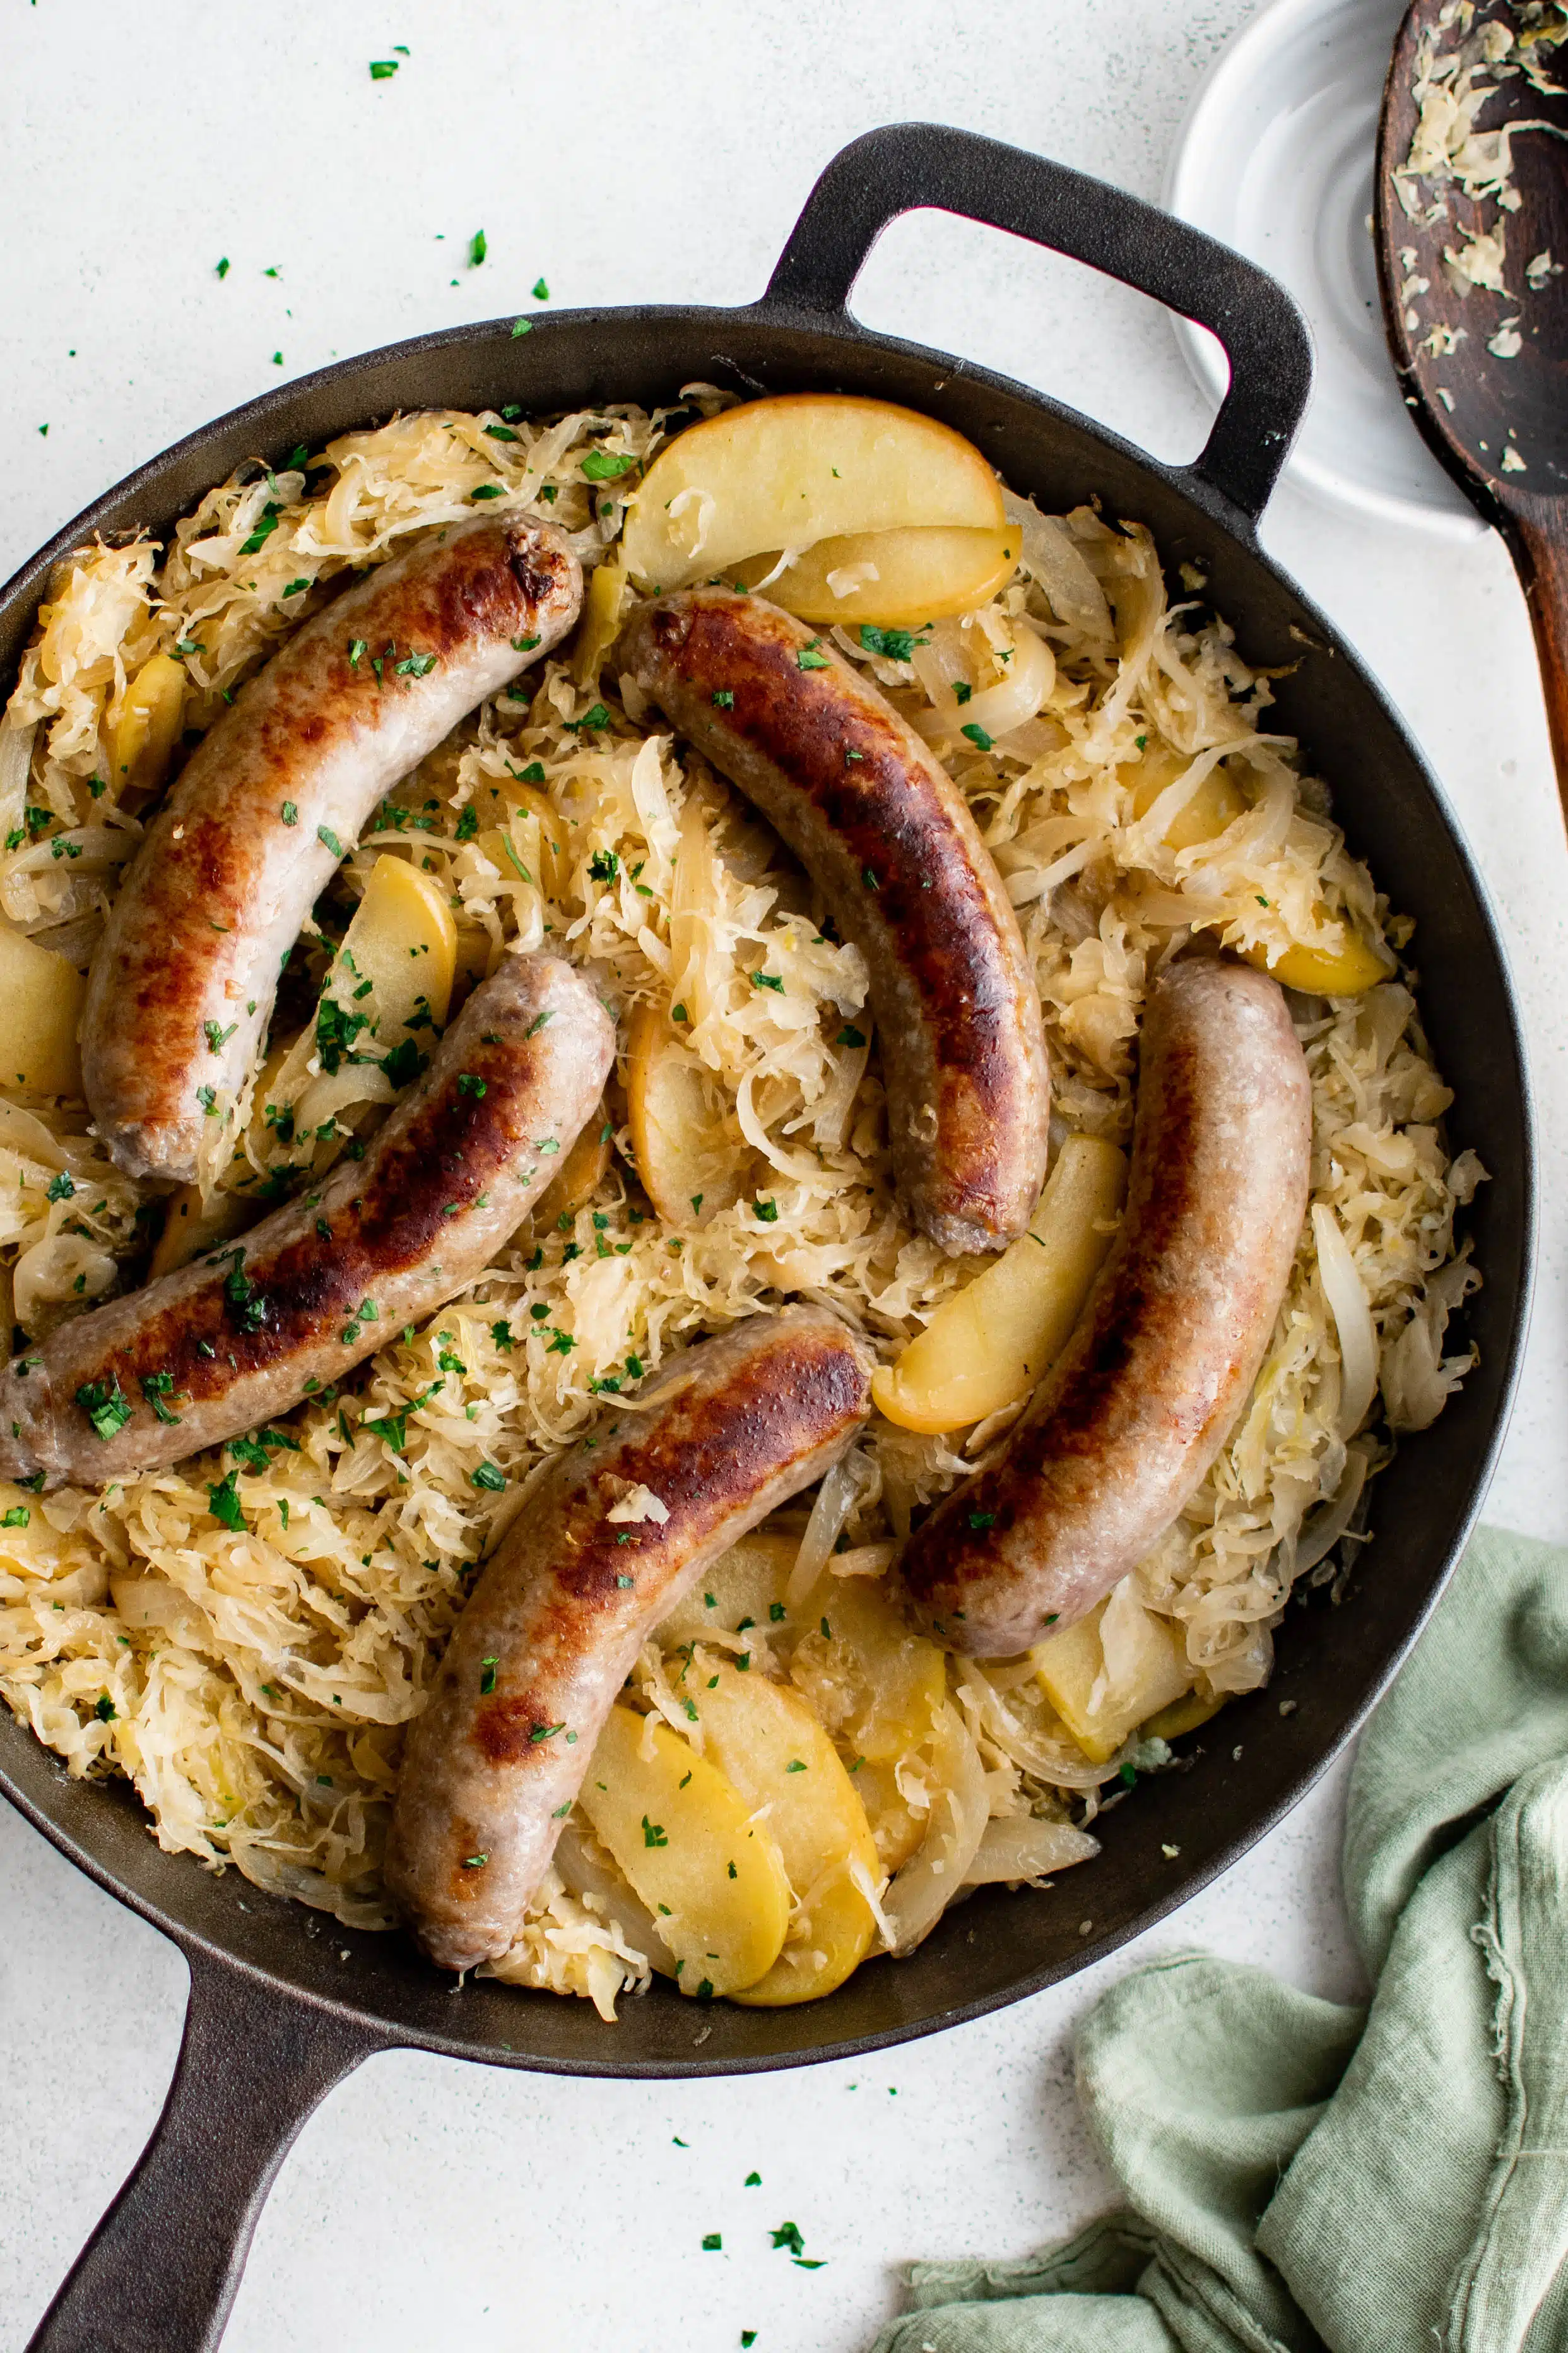 Five large pan-seared bratwurst nestled on top of a skillet filled with sauerkraut sauteed and mixed together with apples and onions and garnished with minced parsley.